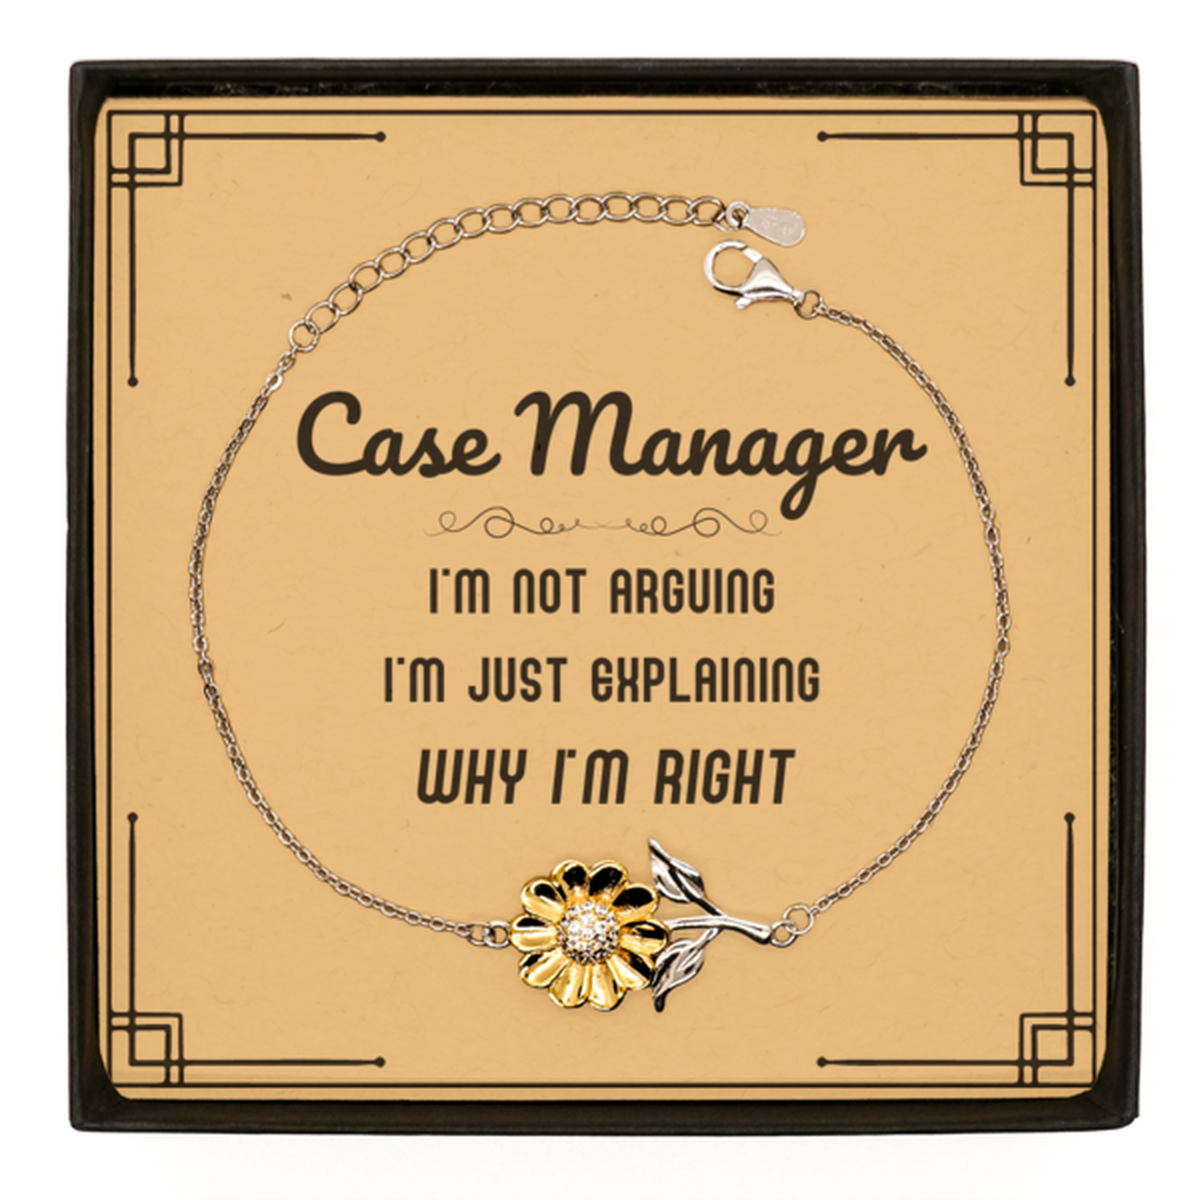 Case Manager I'm not Arguing. I'm Just Explaining Why I'm RIGHT Sunflower Bracelet, Funny Saying Quote Case Manager Gifts For Case Manager Message Card Graduation Birthday Christmas Gifts for Men Women Coworker